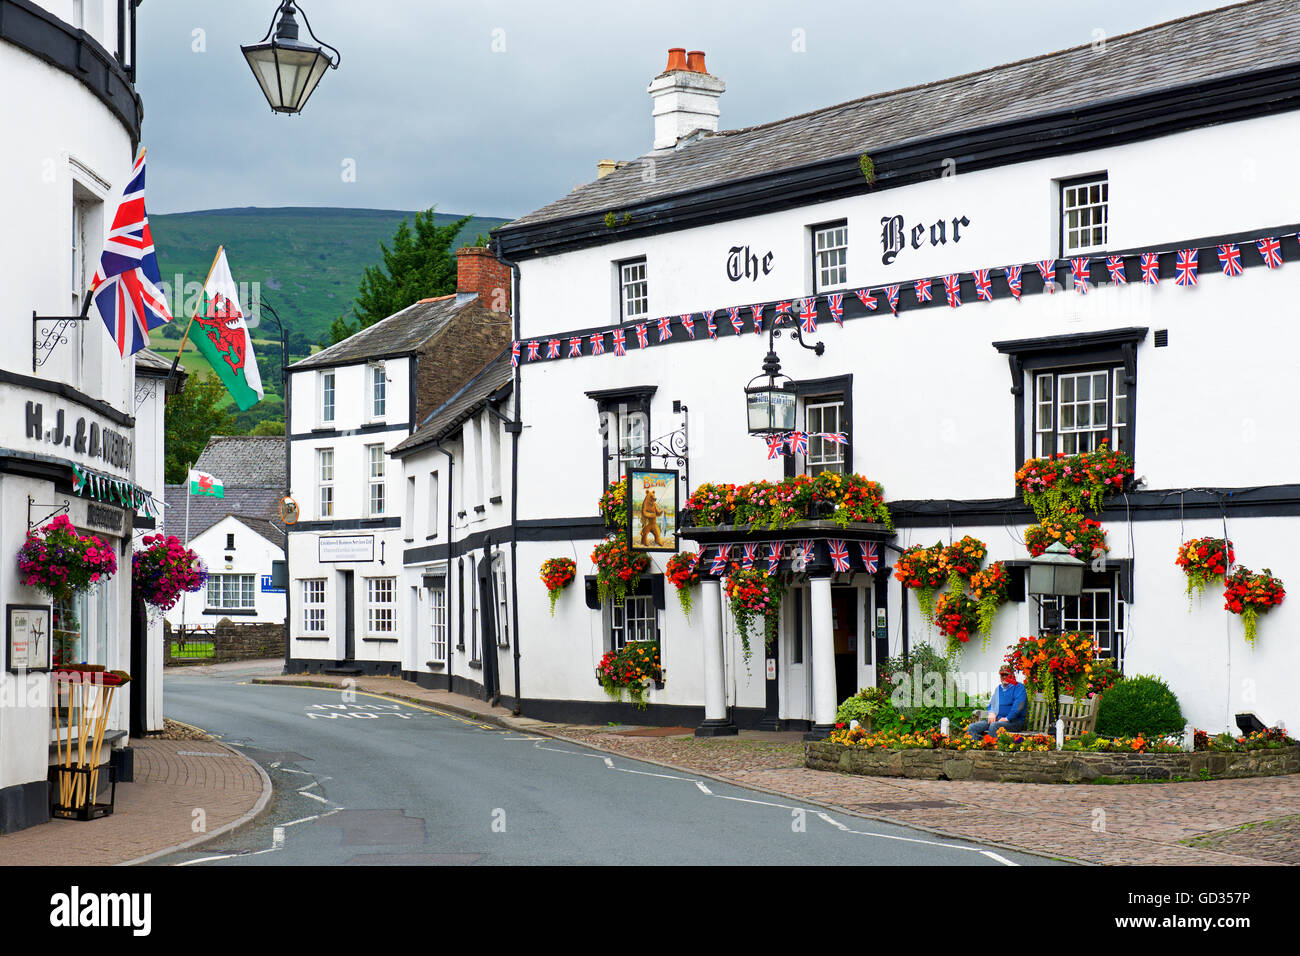 The Bear pub, in the village of Crickhowell, Powys, Wales UK Stock Photo